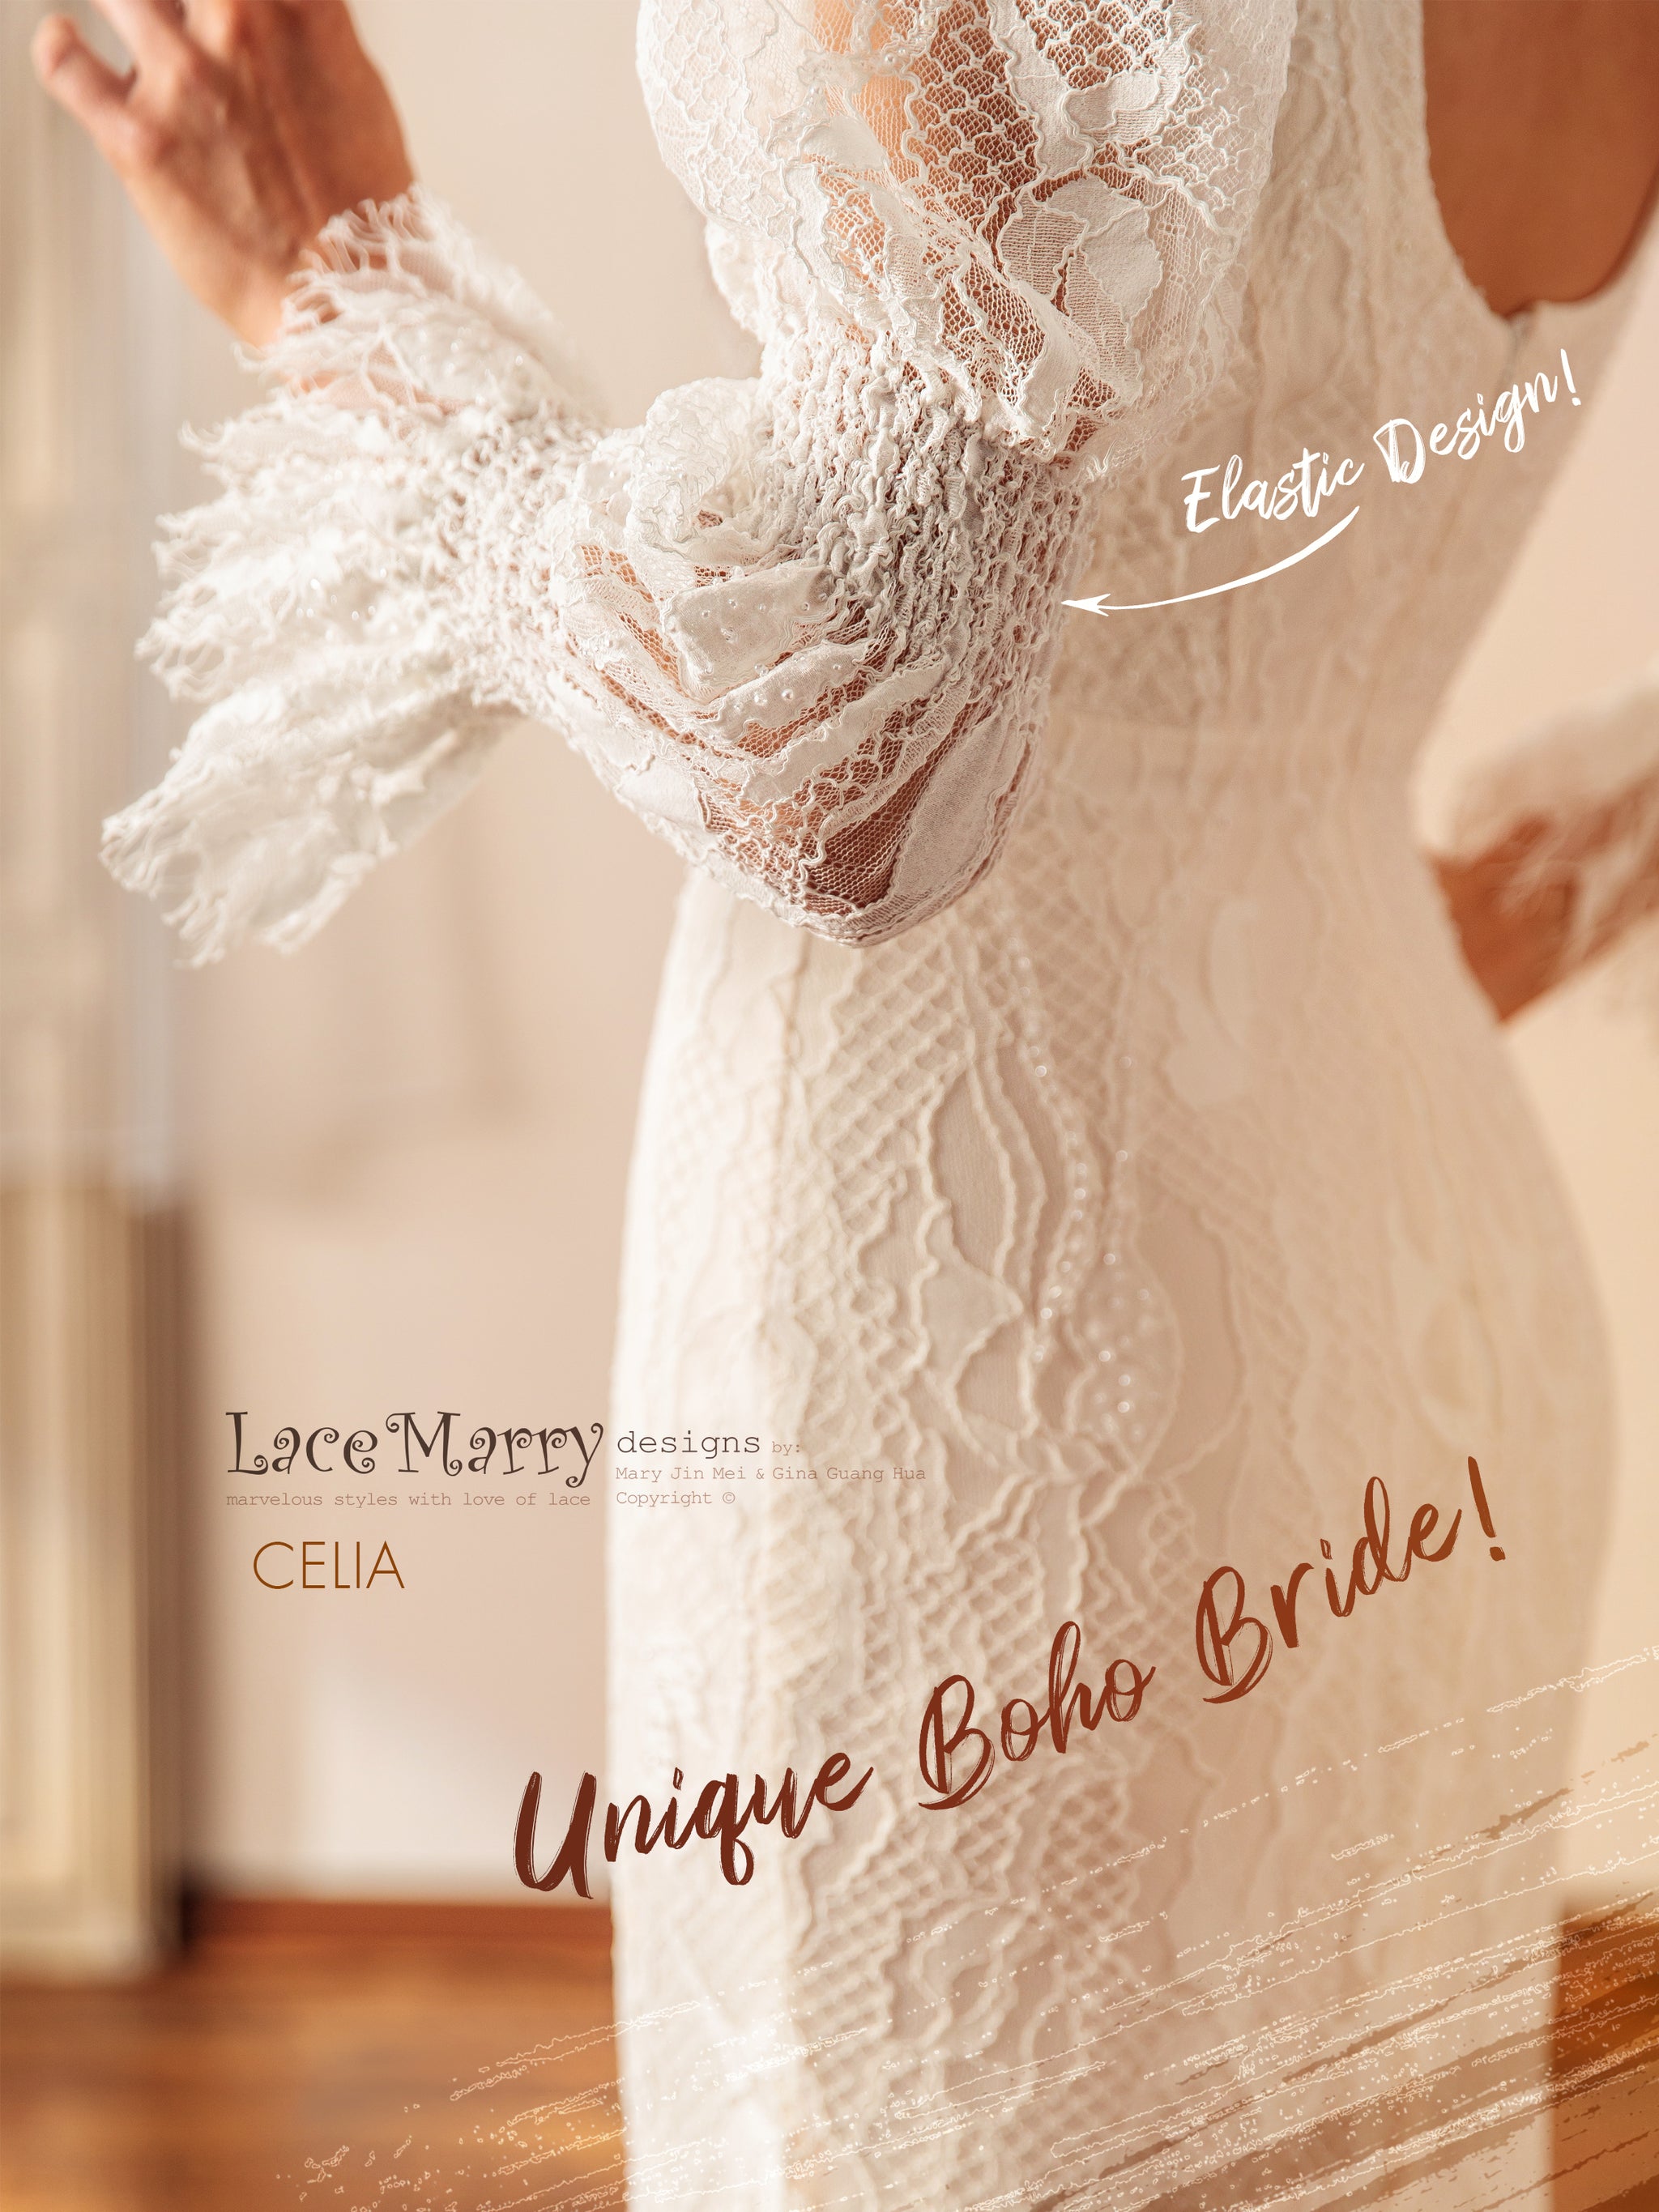 CELIA / Unique Lace Wedding Dress with Long Puff Sleeves - LaceMarry